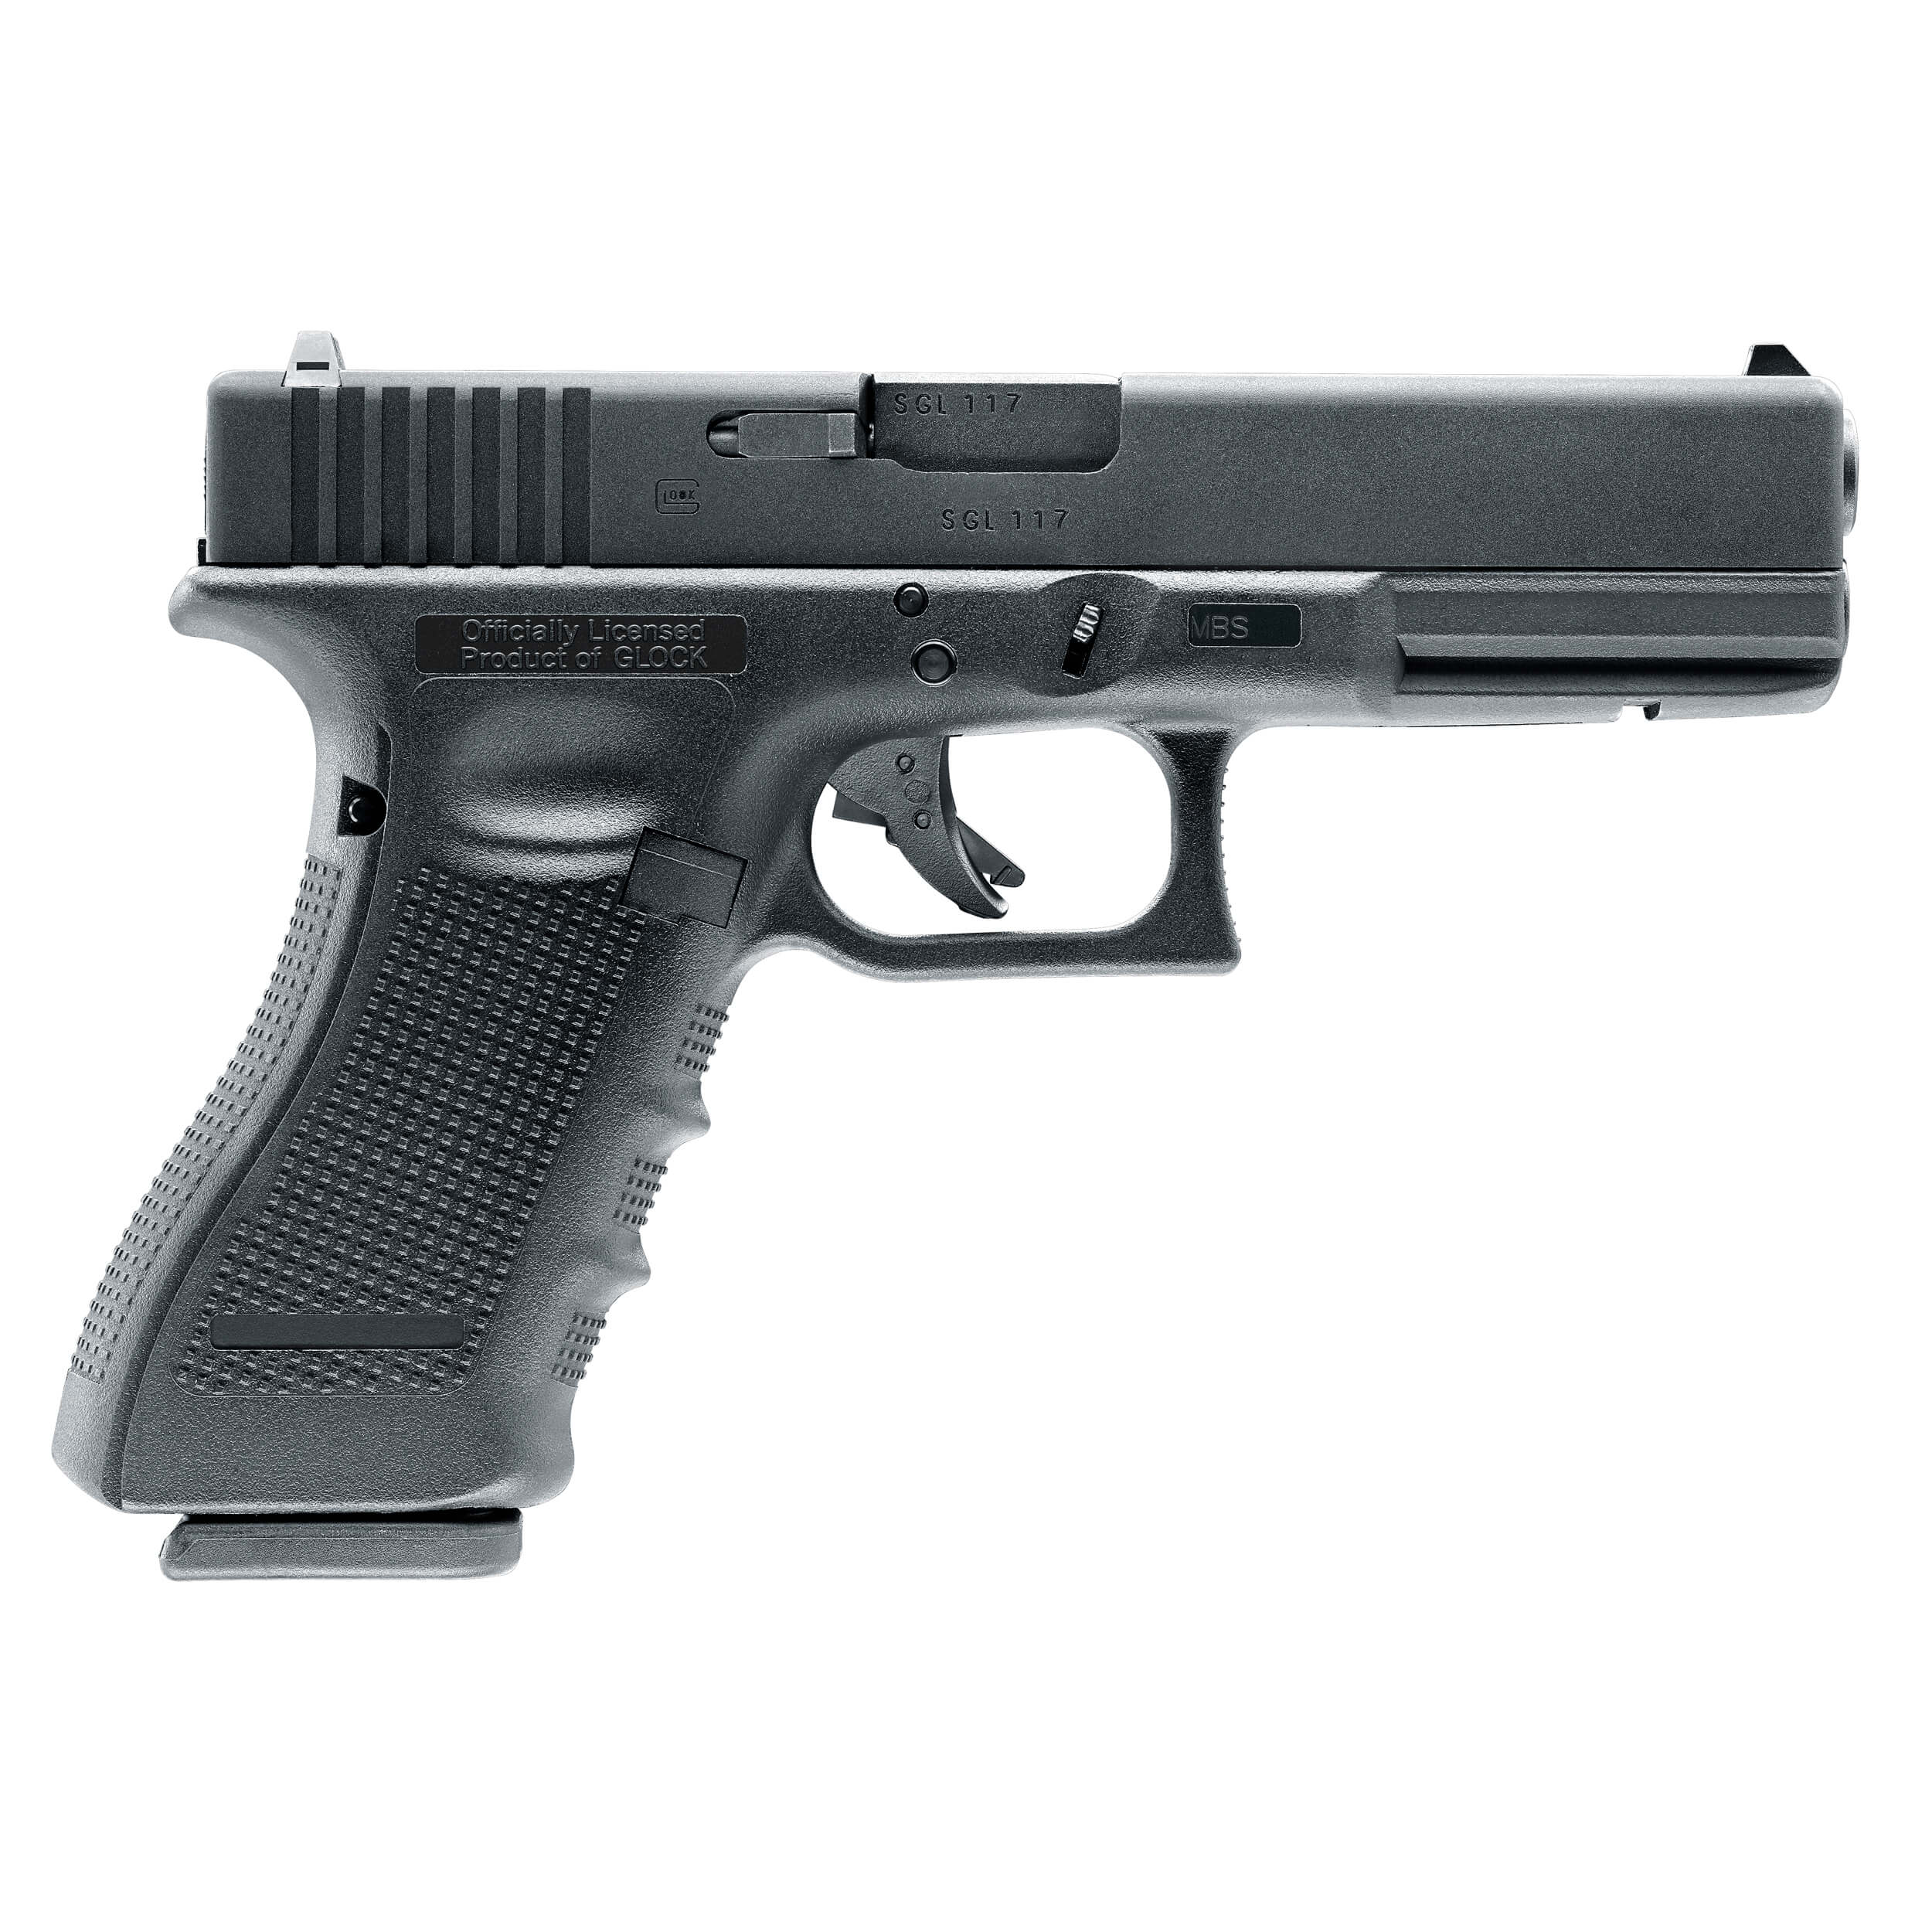 Airsoft GLOCK 17 Gen4 with metal slide and blowback (gas)